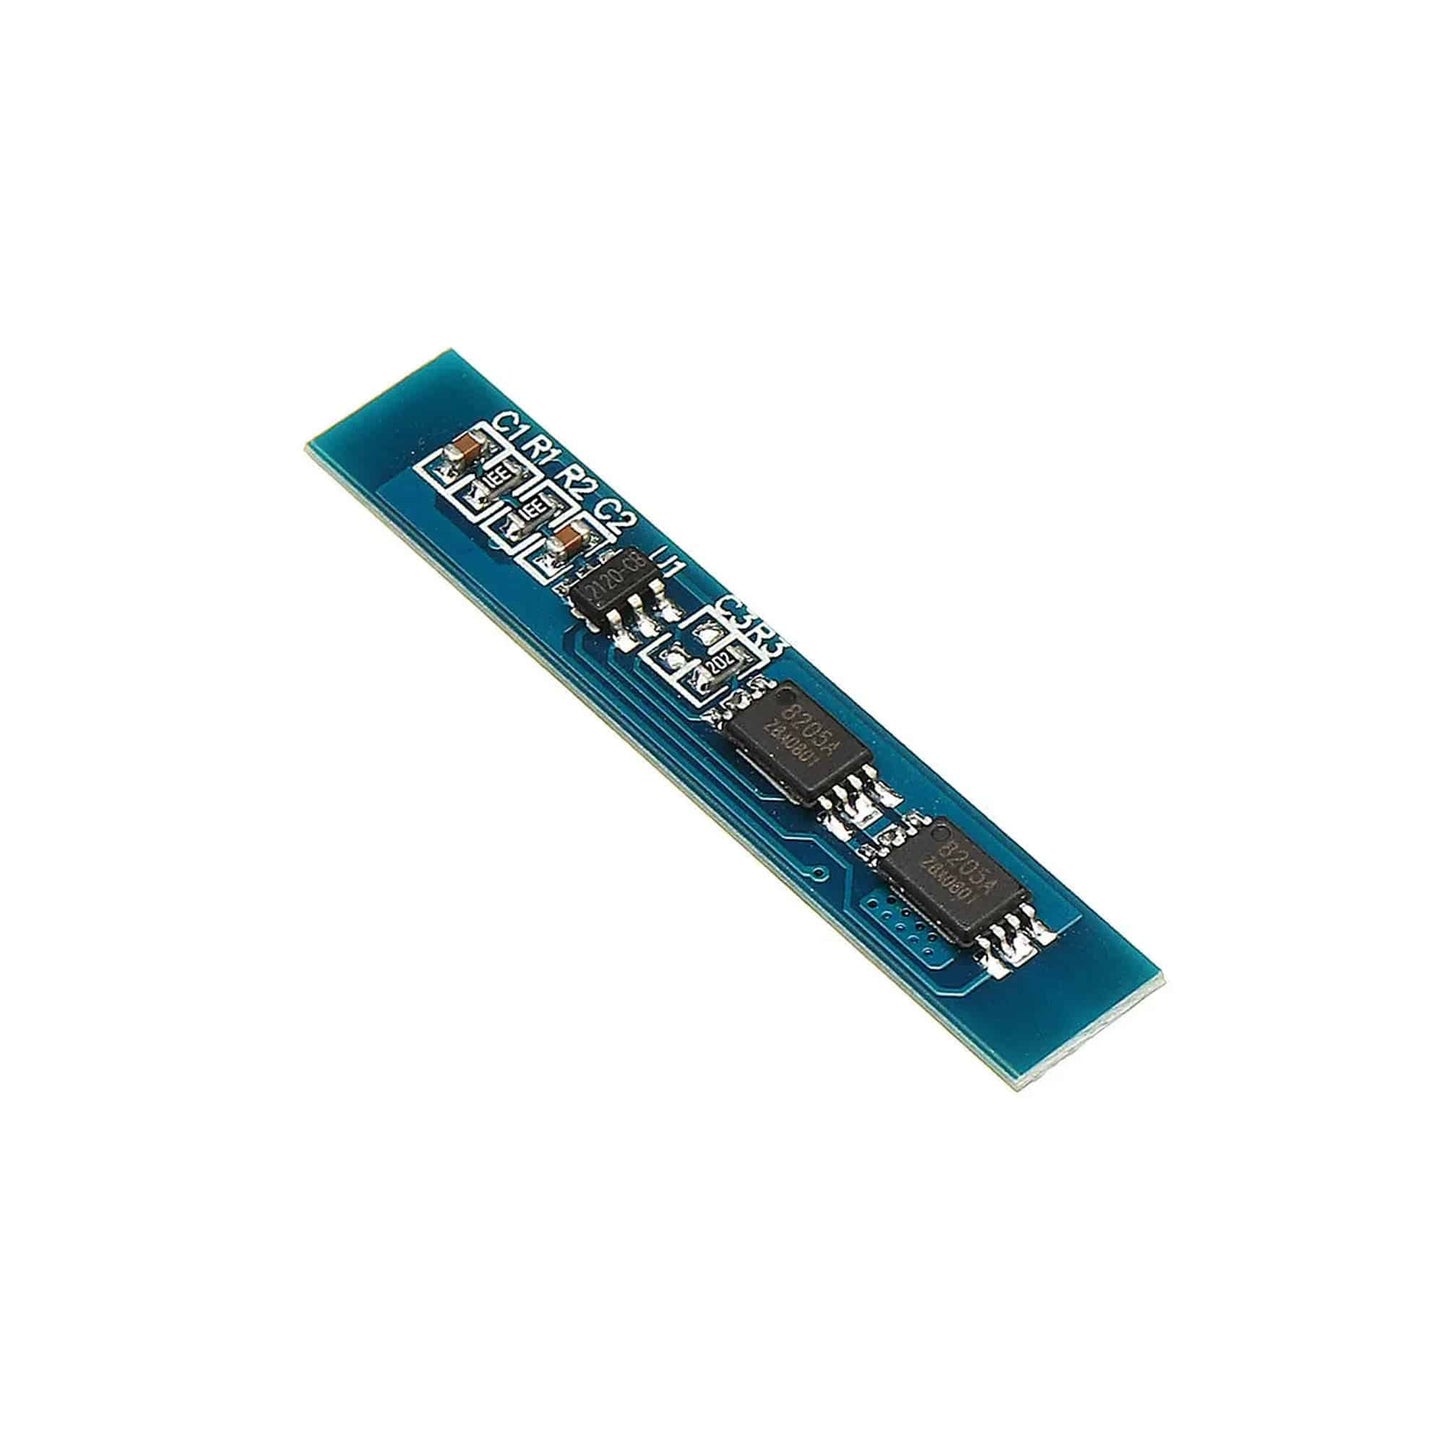 2S 3A BMS Board 2S 3A Li-ion Lithium Battery 7.4V - 8.4V 18650 Charger Protection Board Module - RS2993/RS4835 - REES52